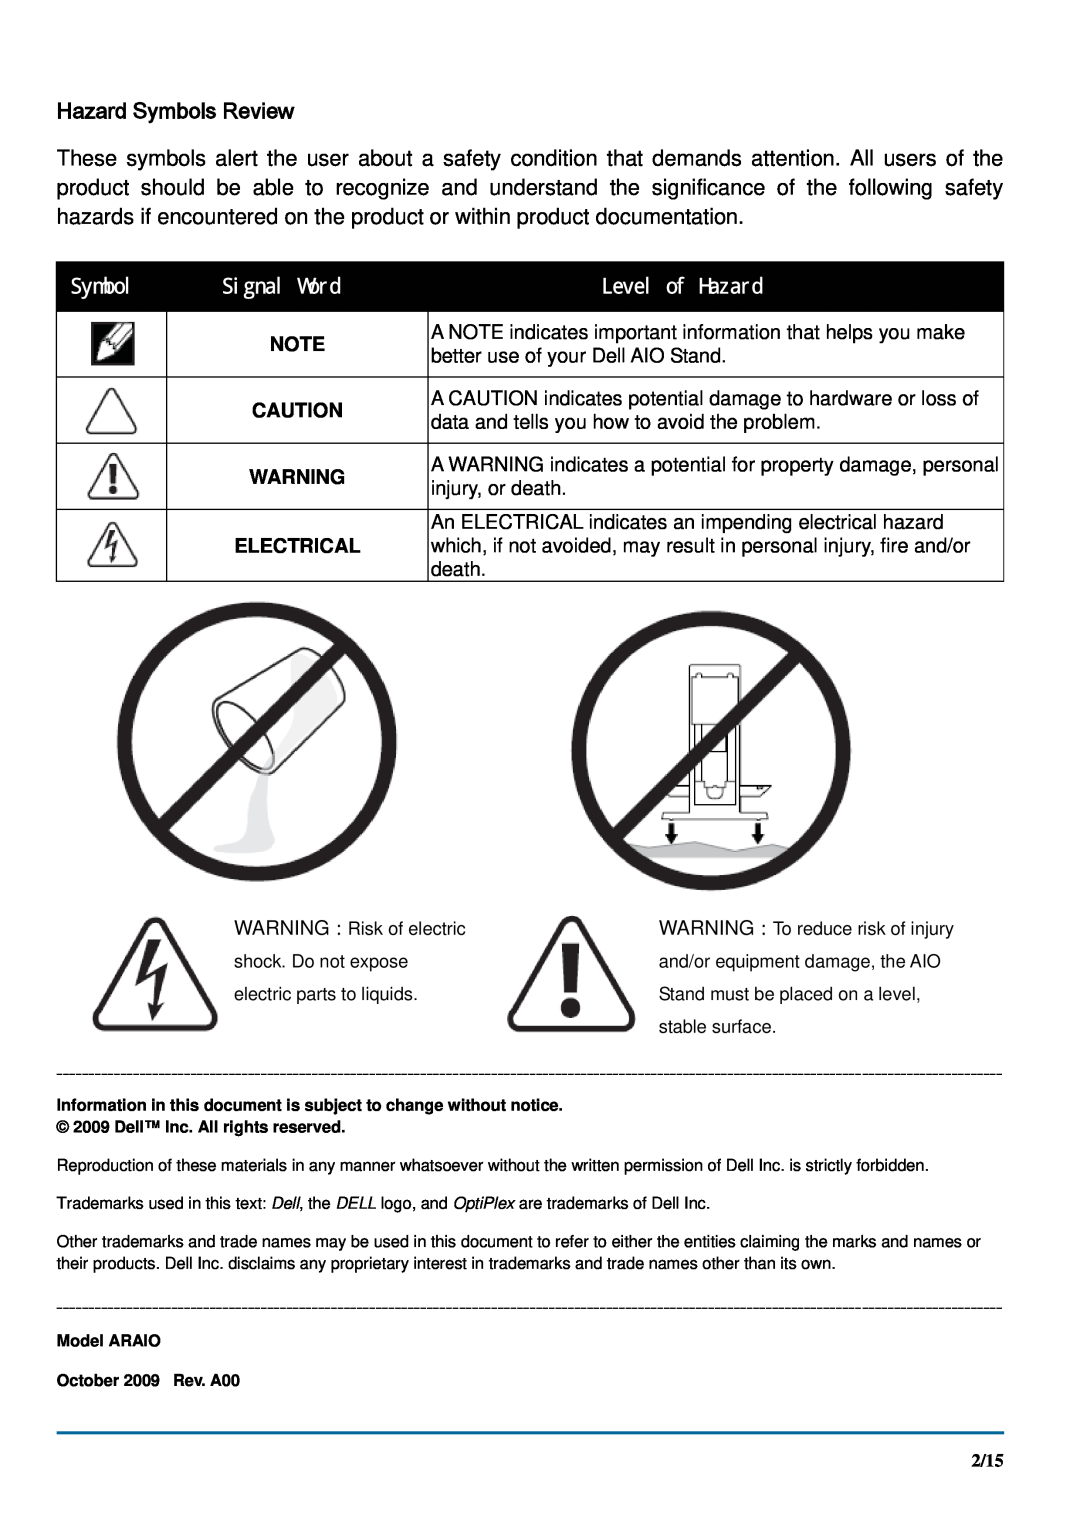 Dell 780 manual Hazard Symbols Review, Electrical, Signal Word, Level of Hazard 